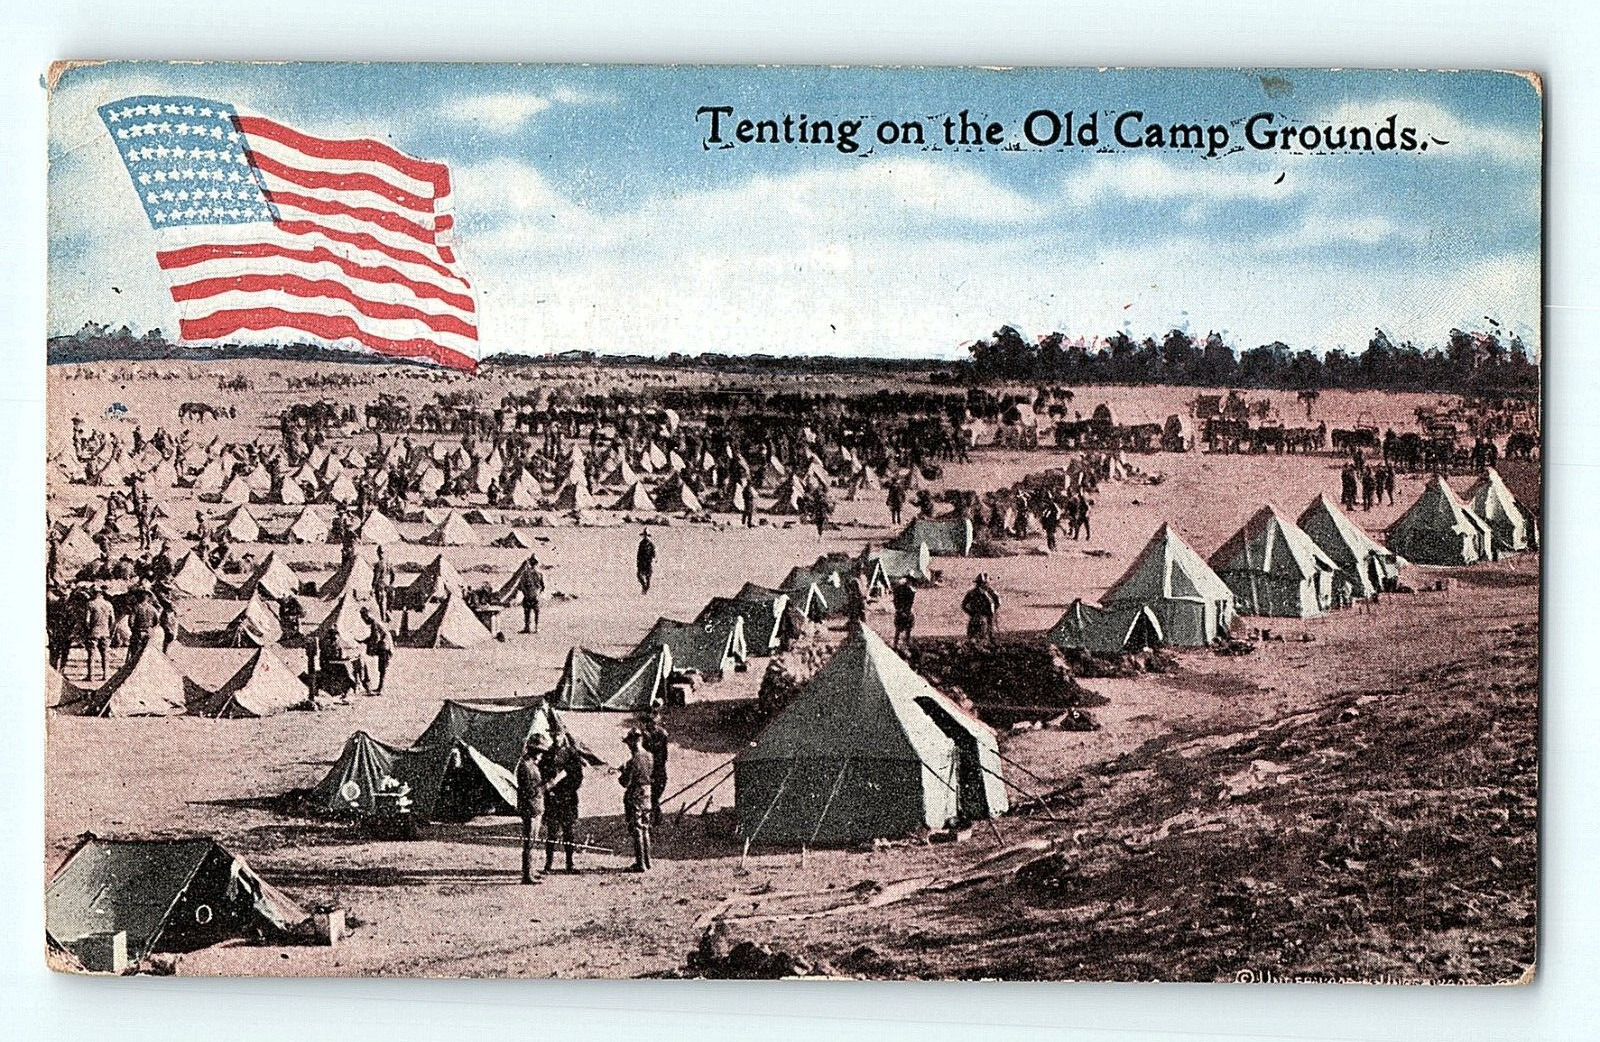 Tenting on the Old Camp Grounds Soldiers American Flag Military Postcard E4